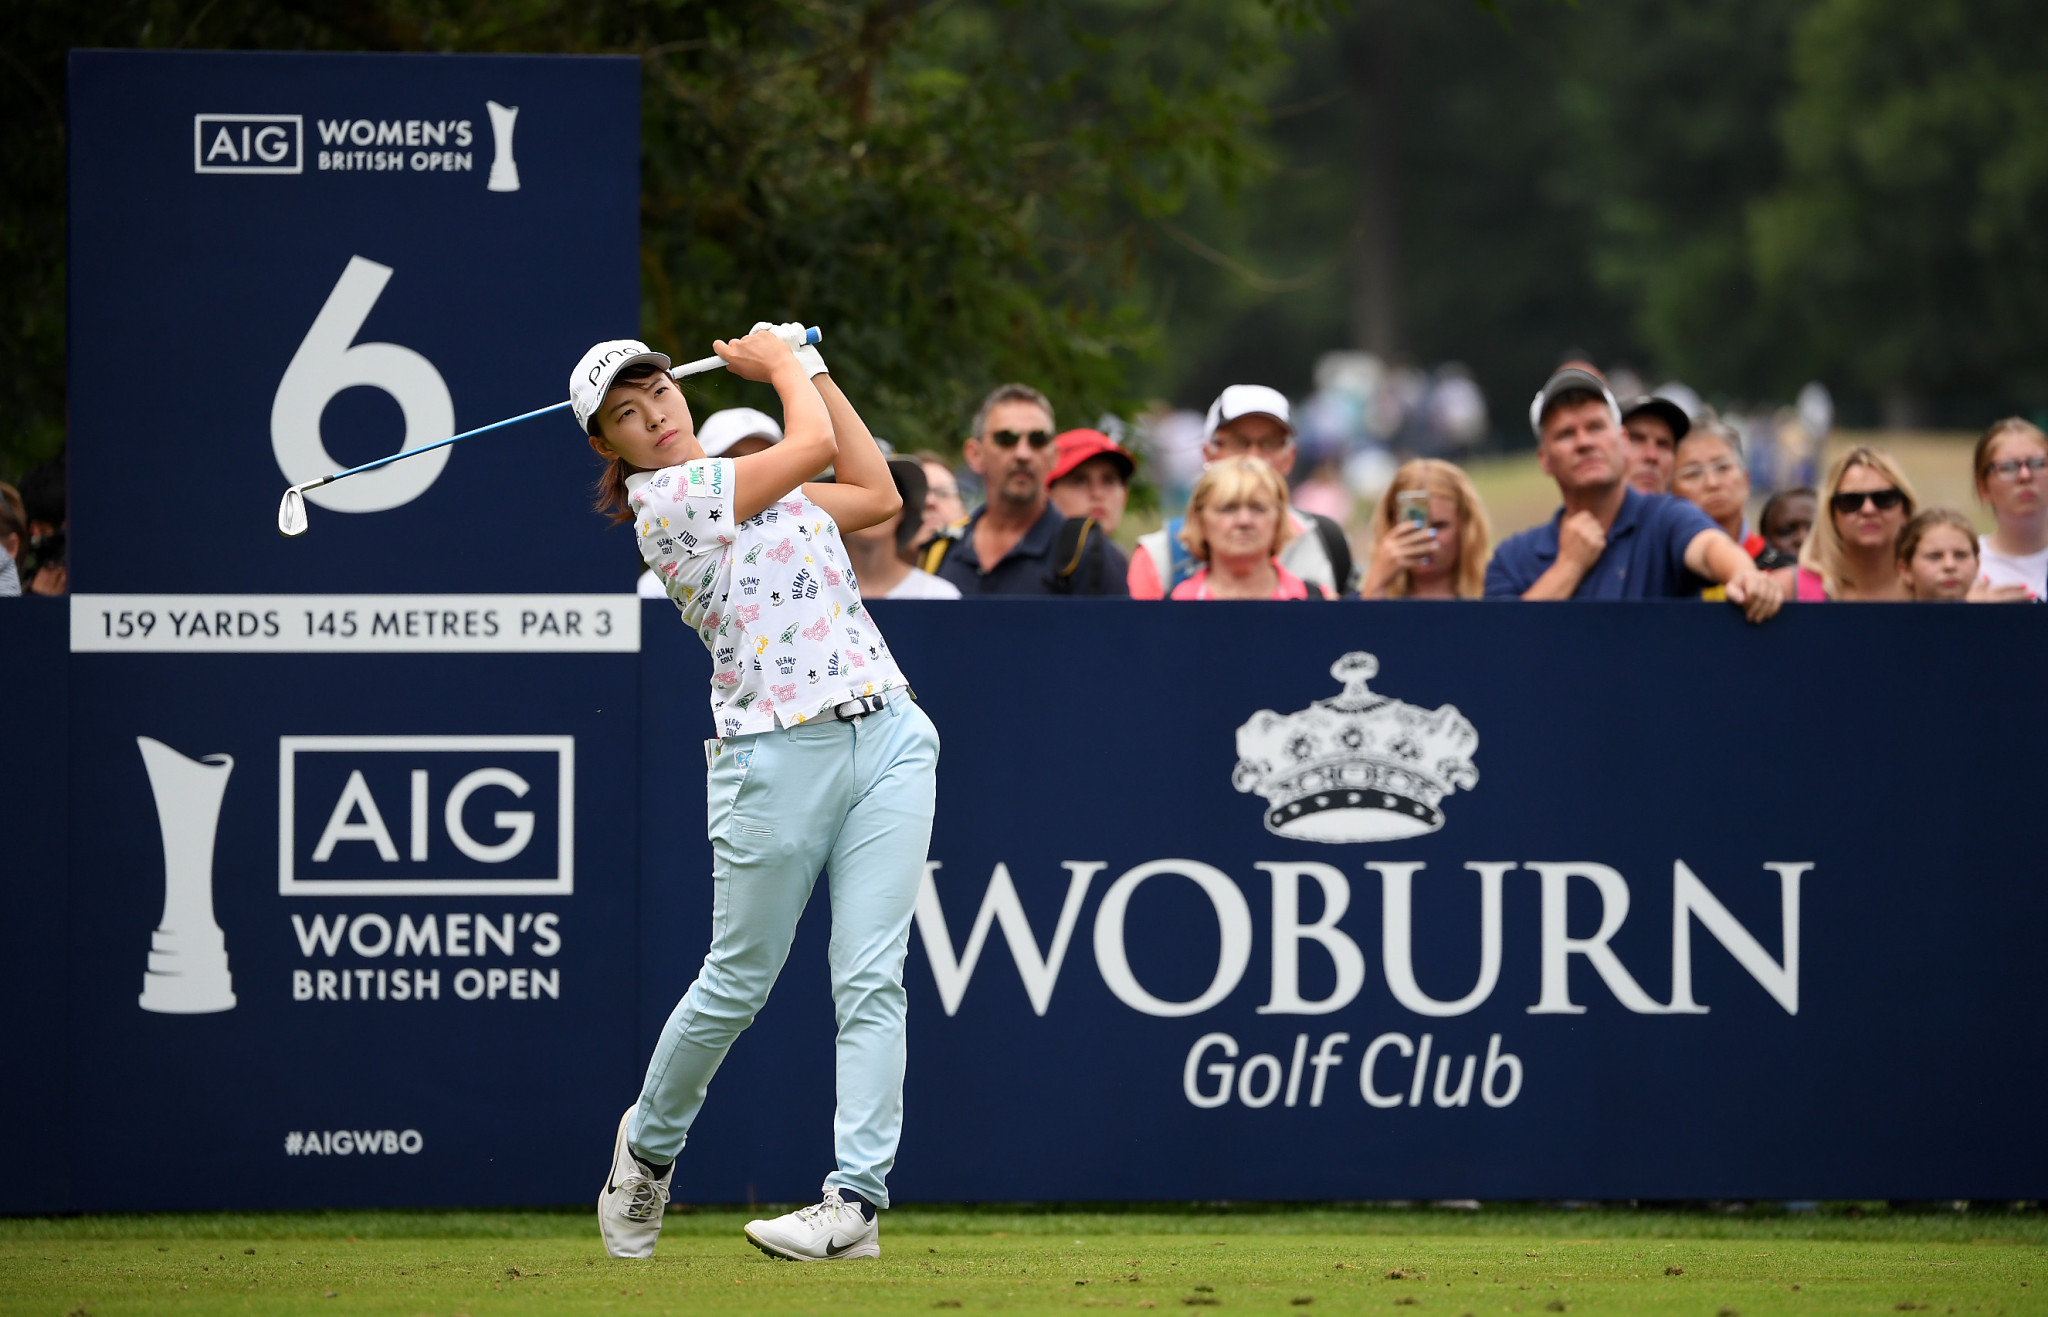 Women's British Open to be played without spectators in August 